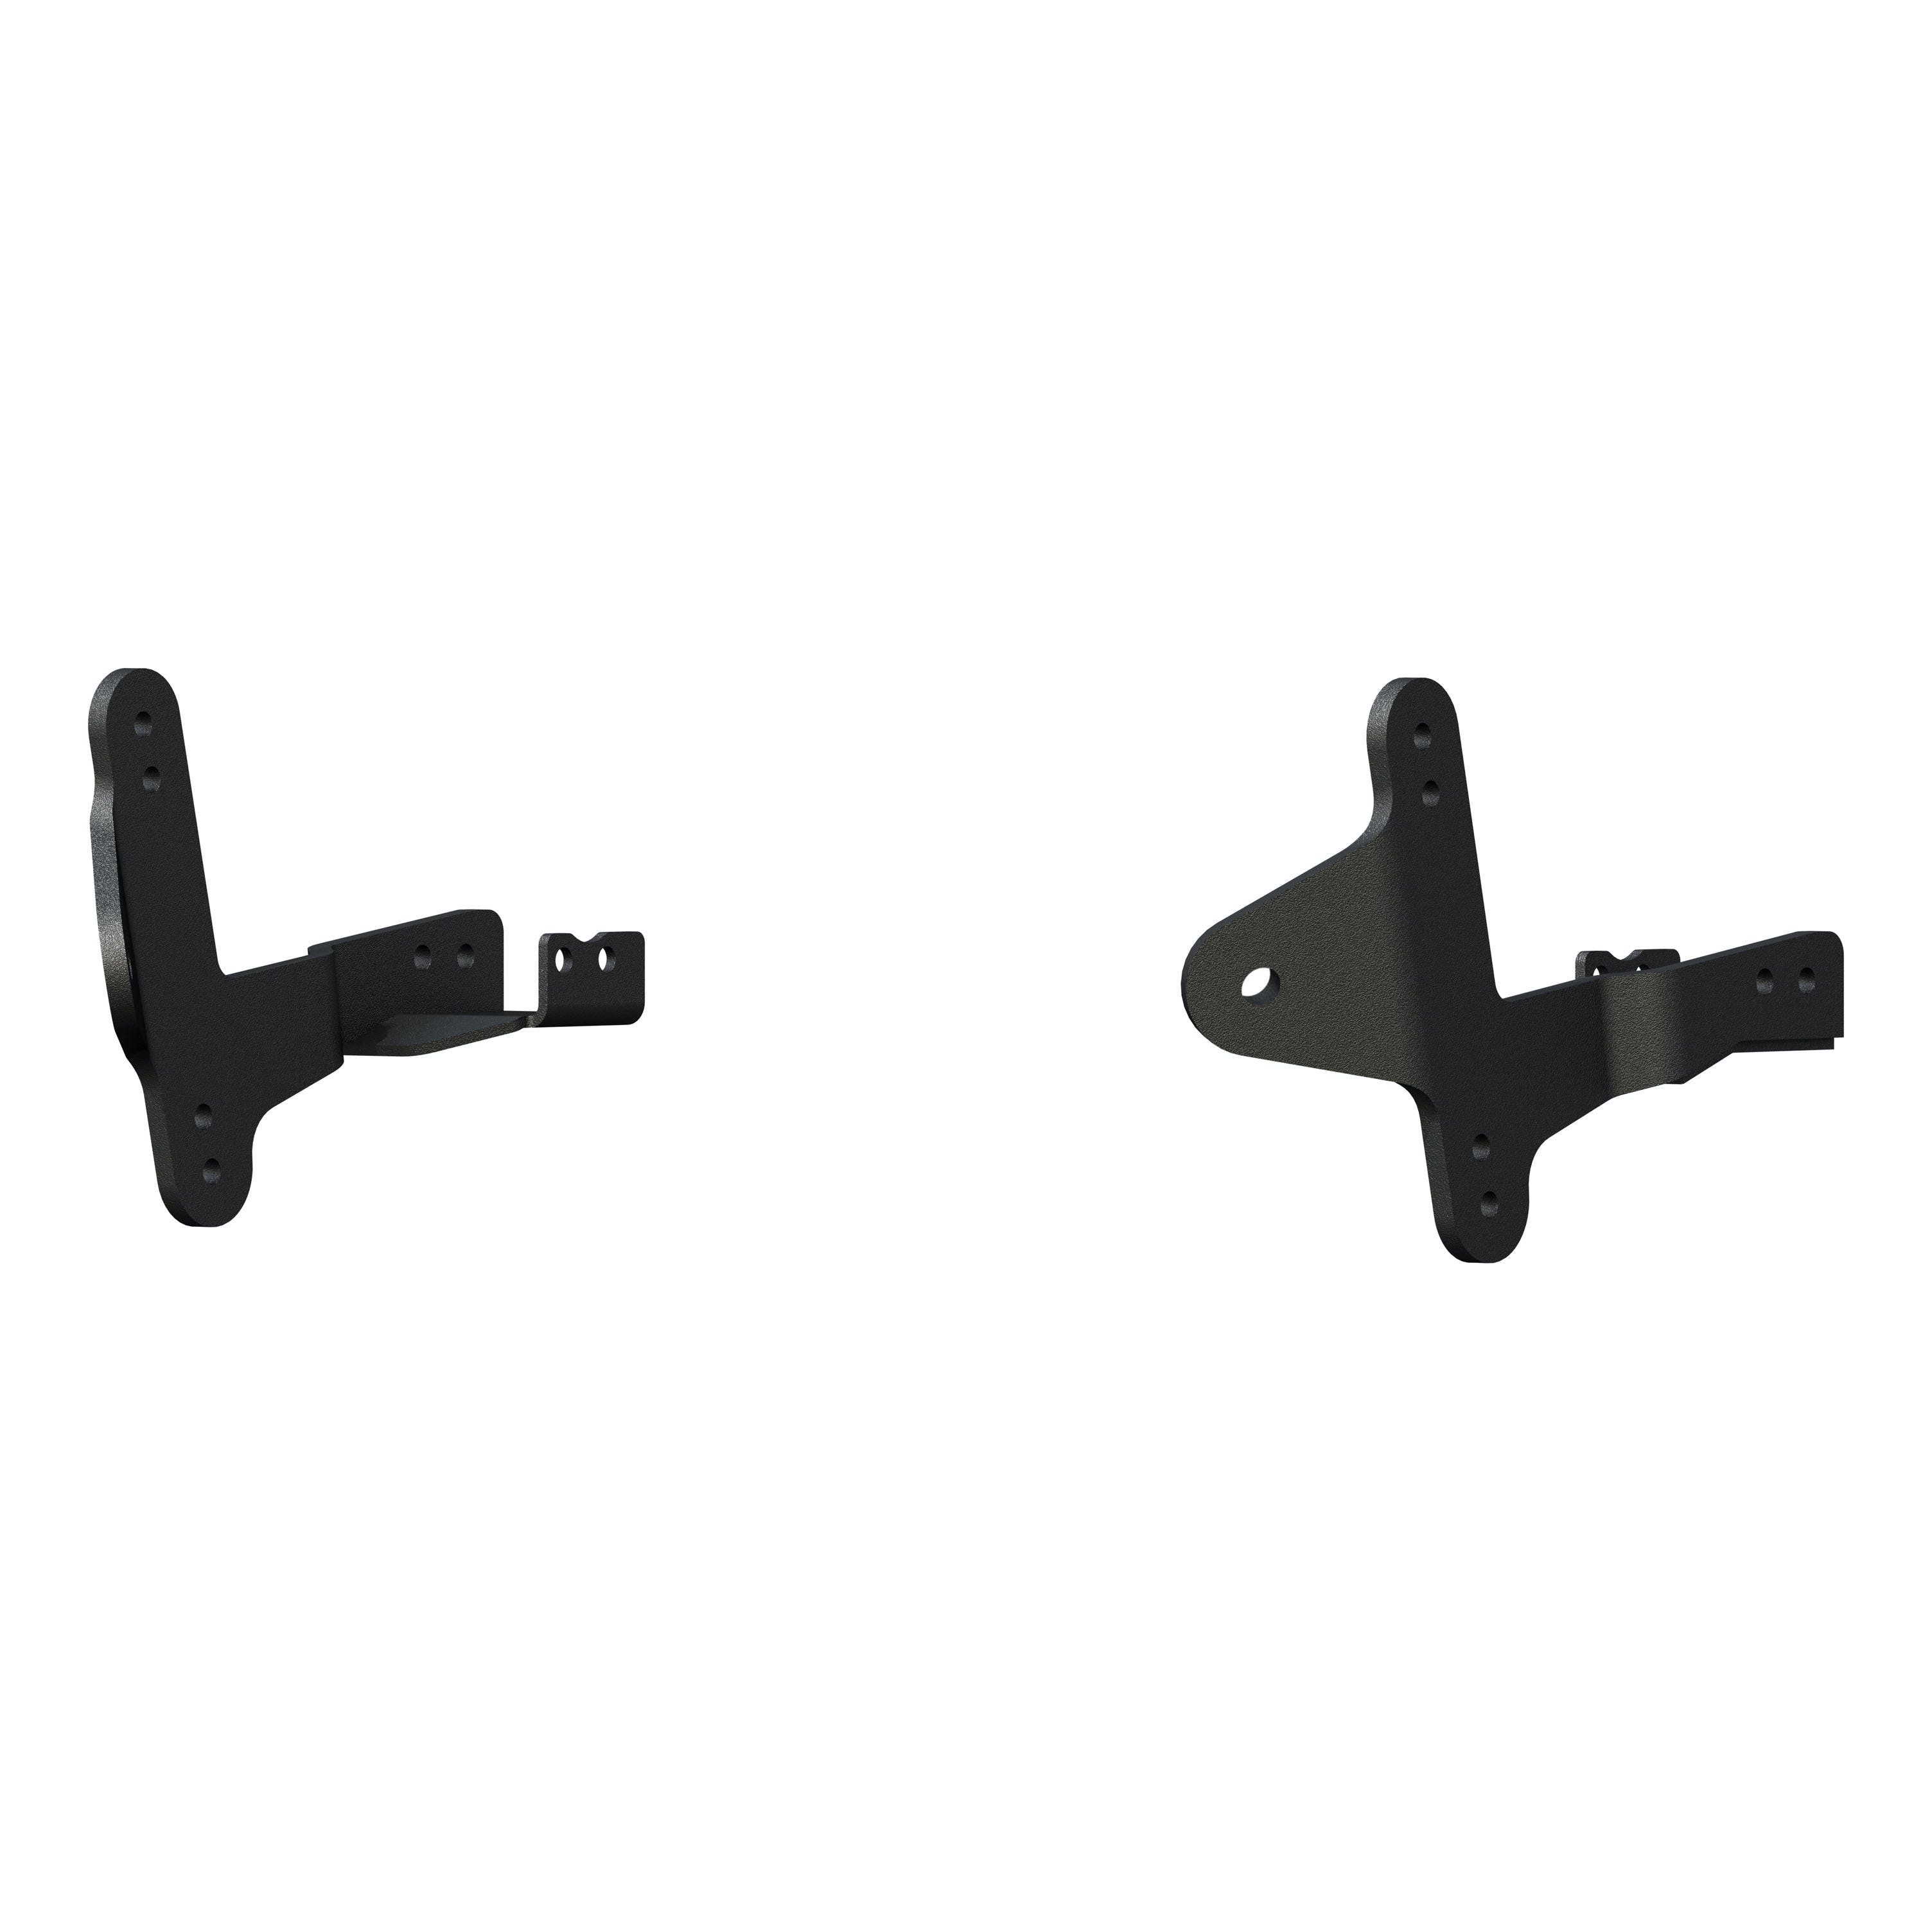 LUVERNE 321411 Prowler Max Grille Guard Brackets